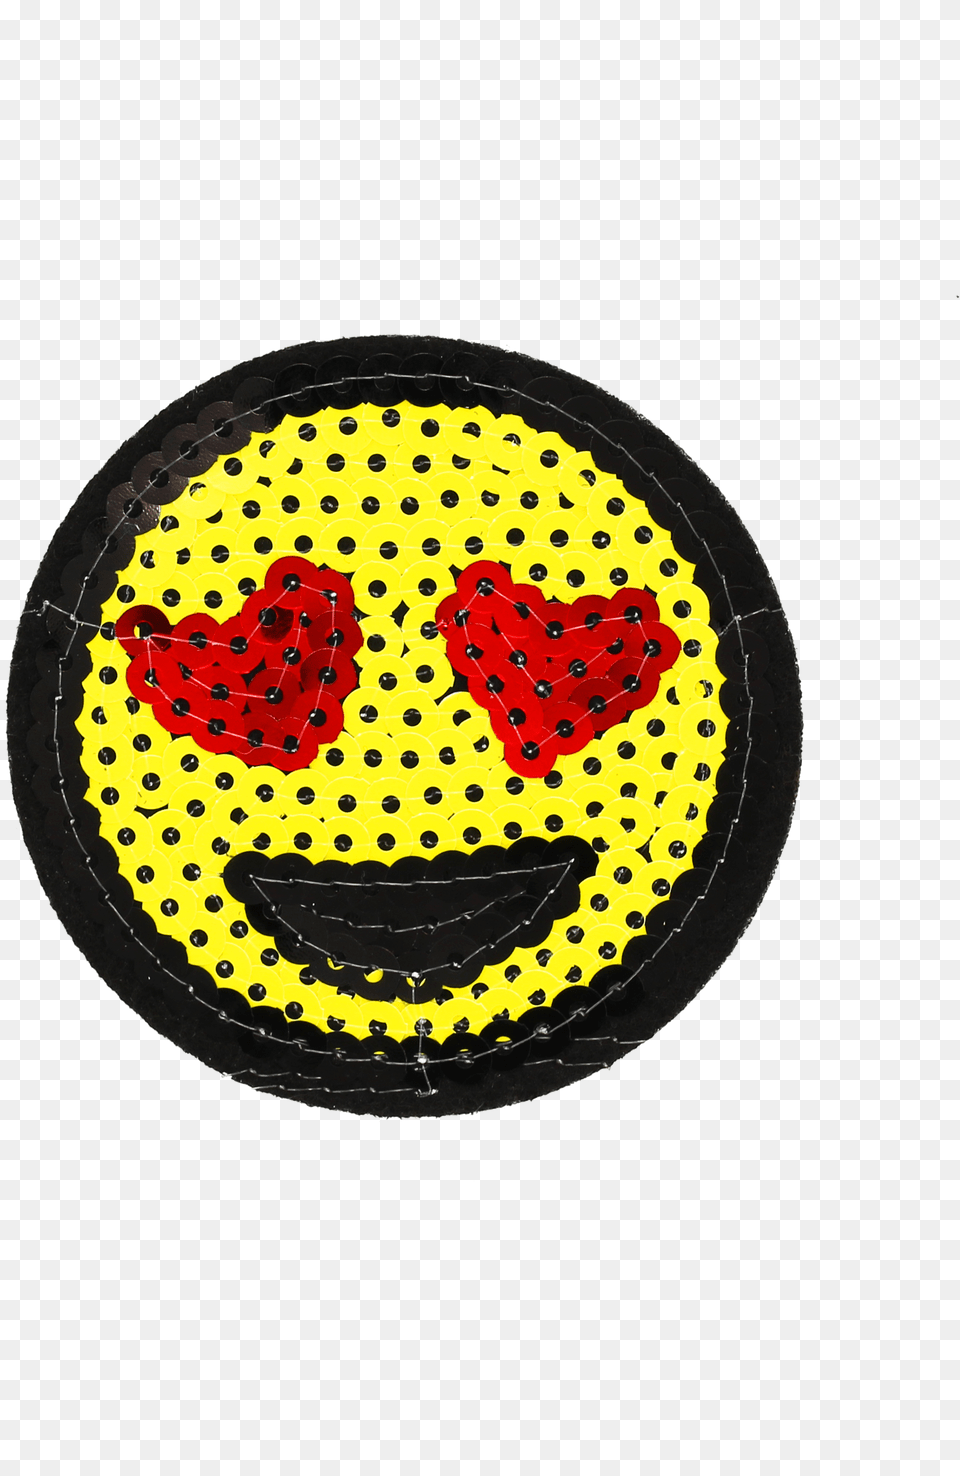 Sequins Smiley Face With Heart Shape Gasthaus Pillhofer, Logo, Plate, Accessories Free Png